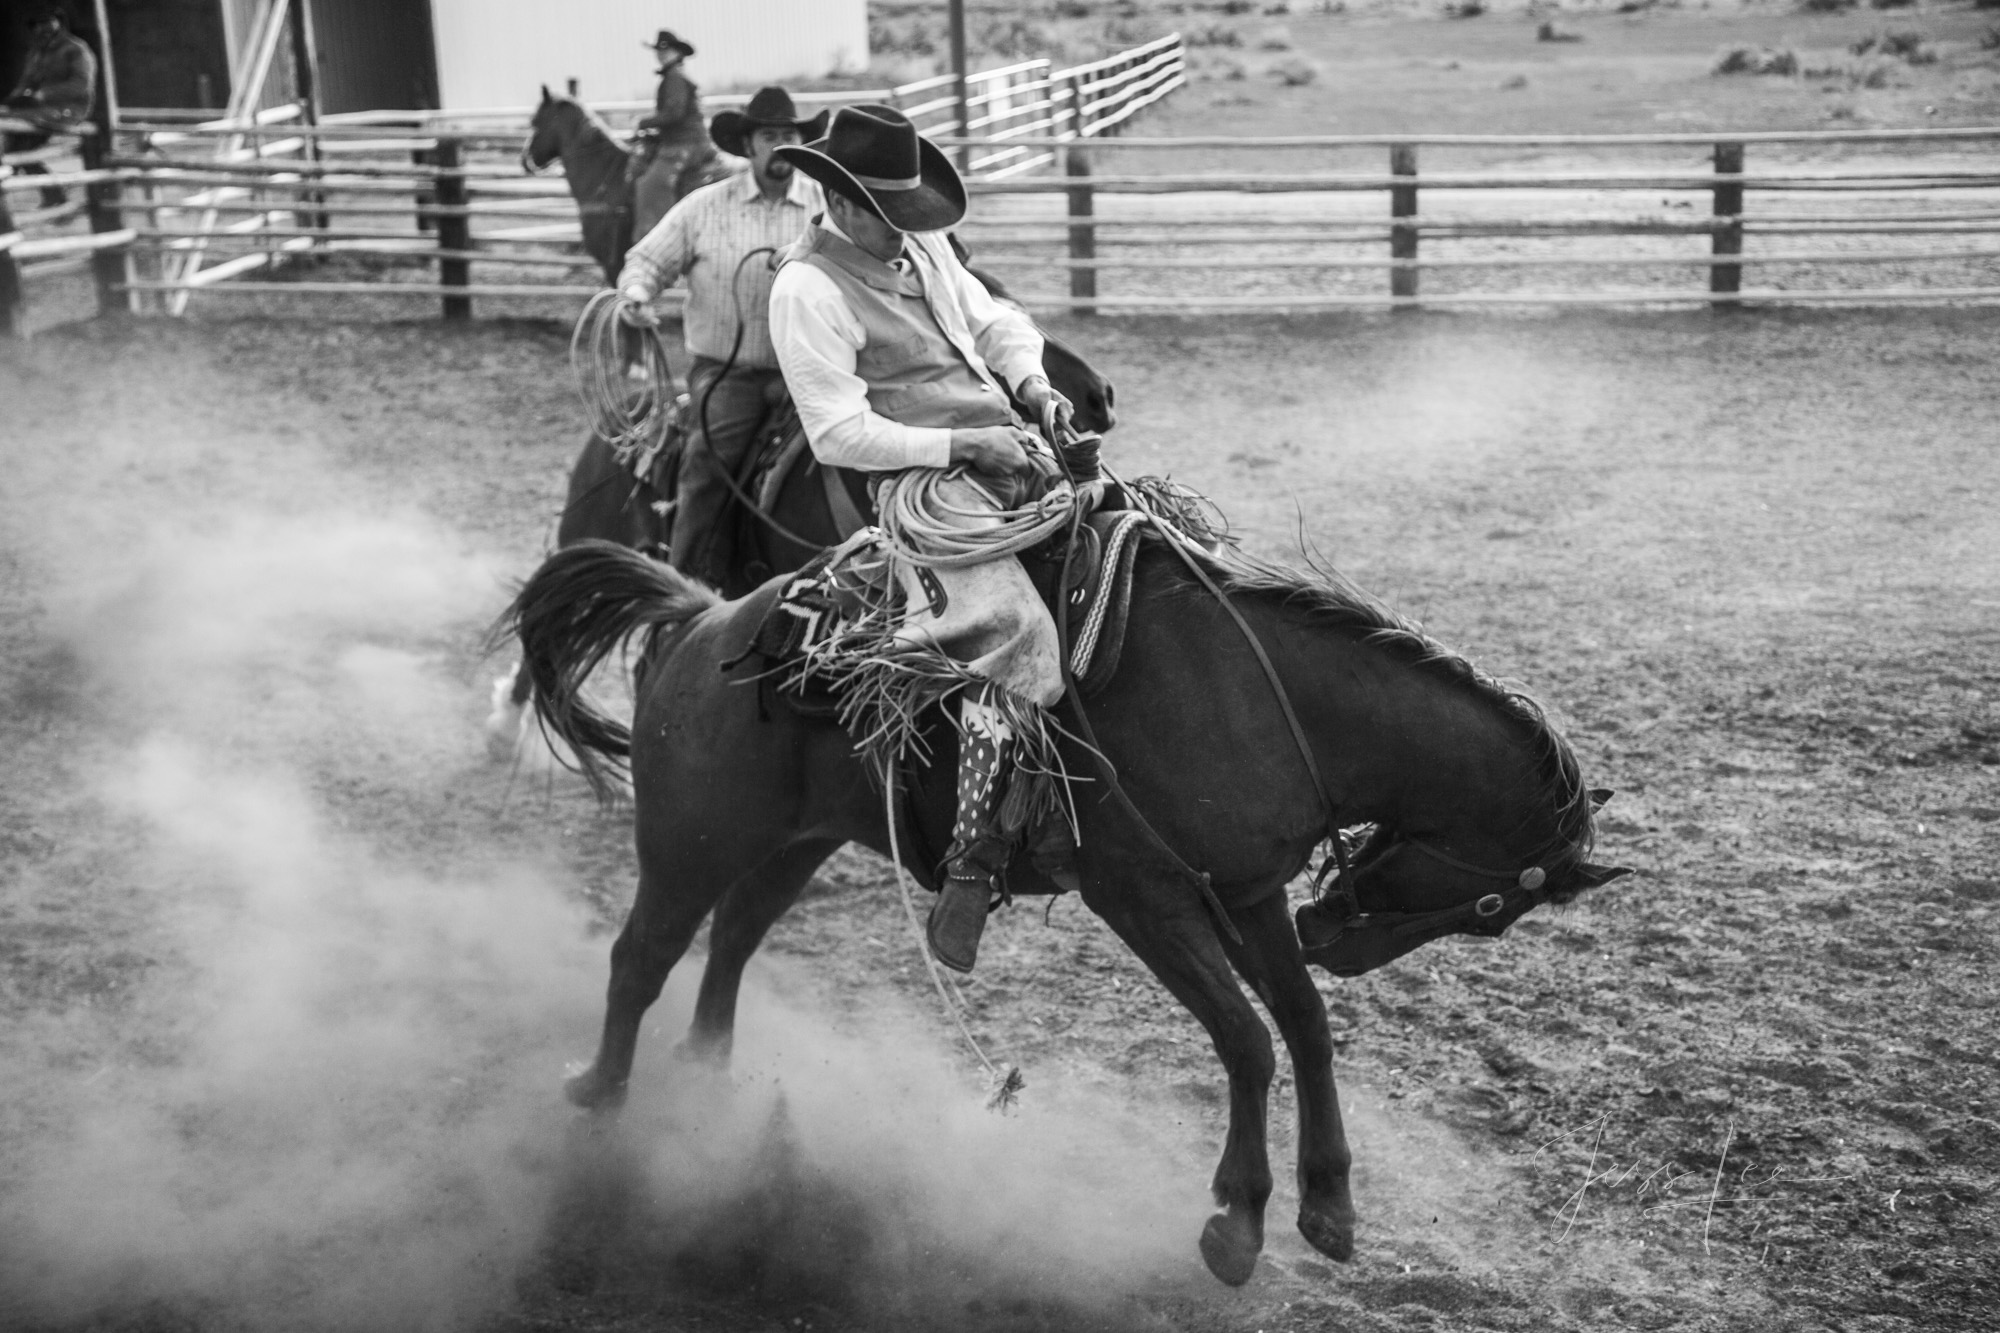 Fine Art Limited Edition Photo Prints of Cowboys, Horses, and life in the West.  Cowboy pictures in black and white. Style Points...